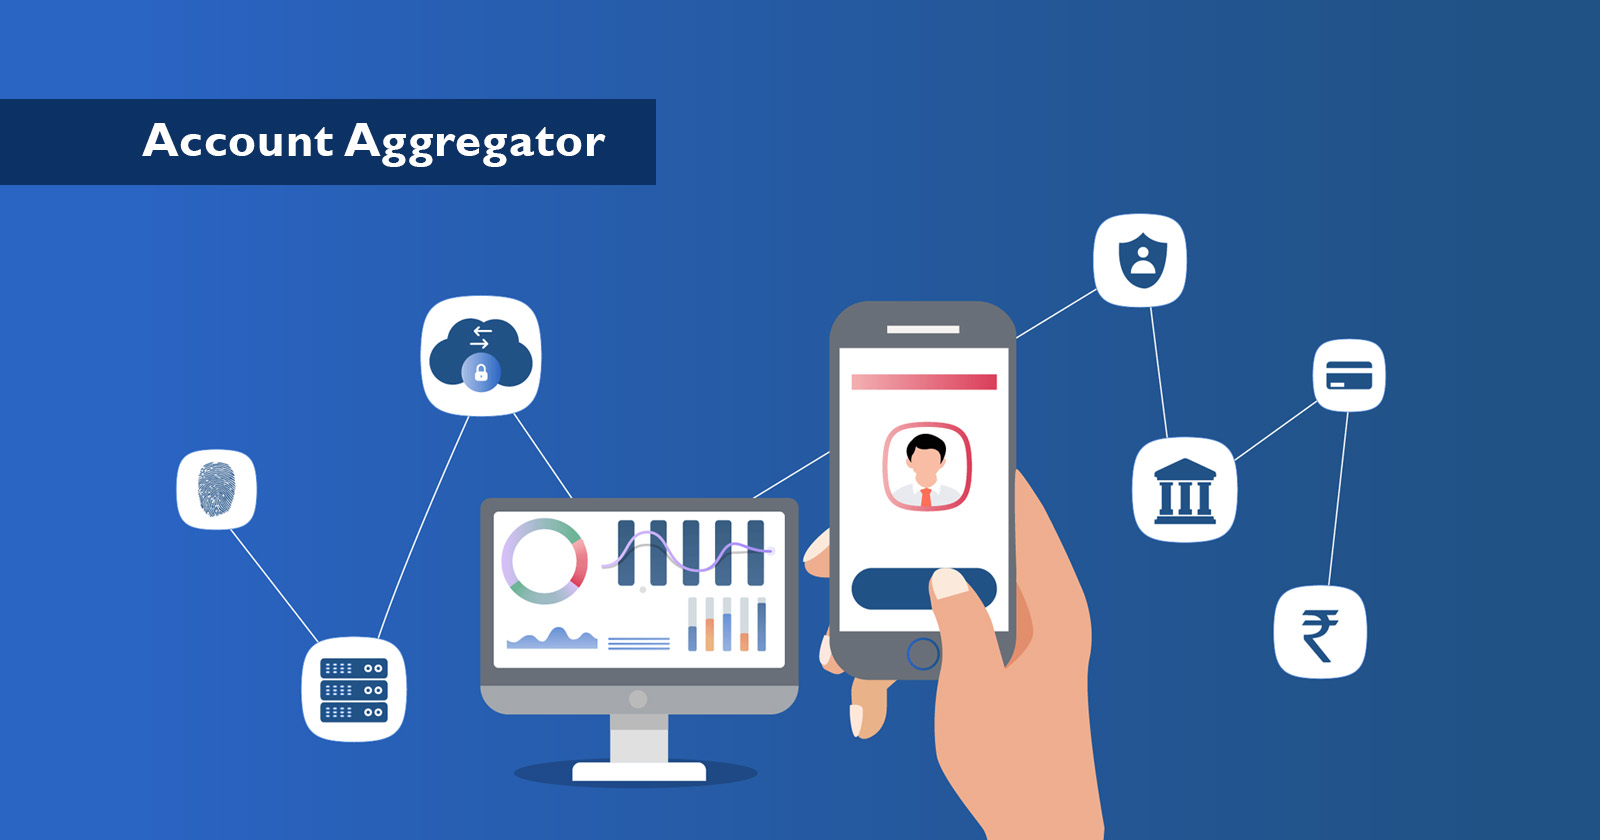 Central Govt -Central Govt notifies Account Aggregator - Account Aggregator - System to Share Information - System to Share Information with Common Portal - taxscan